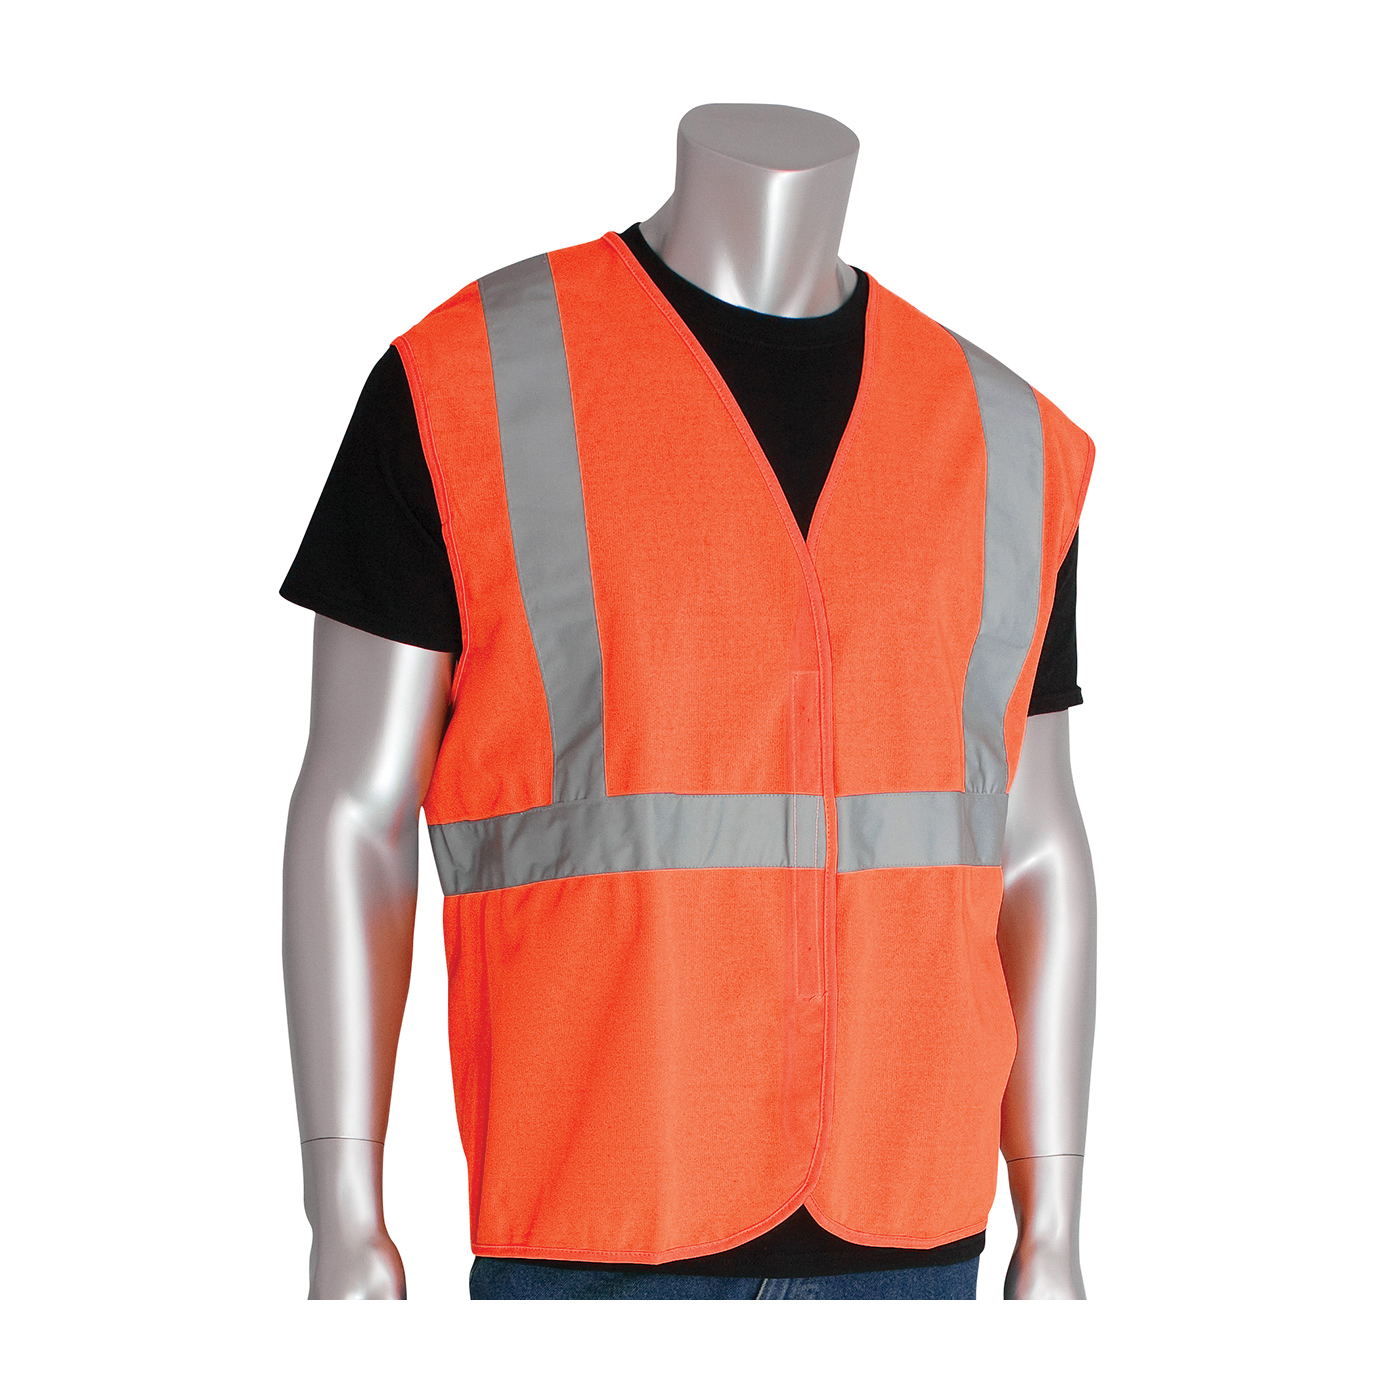 PIP® 302-WCENGOR-4X Solid Vest, 4XL, Hi-Viz Orange, Polyester, Hook and Loop Closure, ANSI Class: Class 2, Specifications Met: ANSI 107 Type R